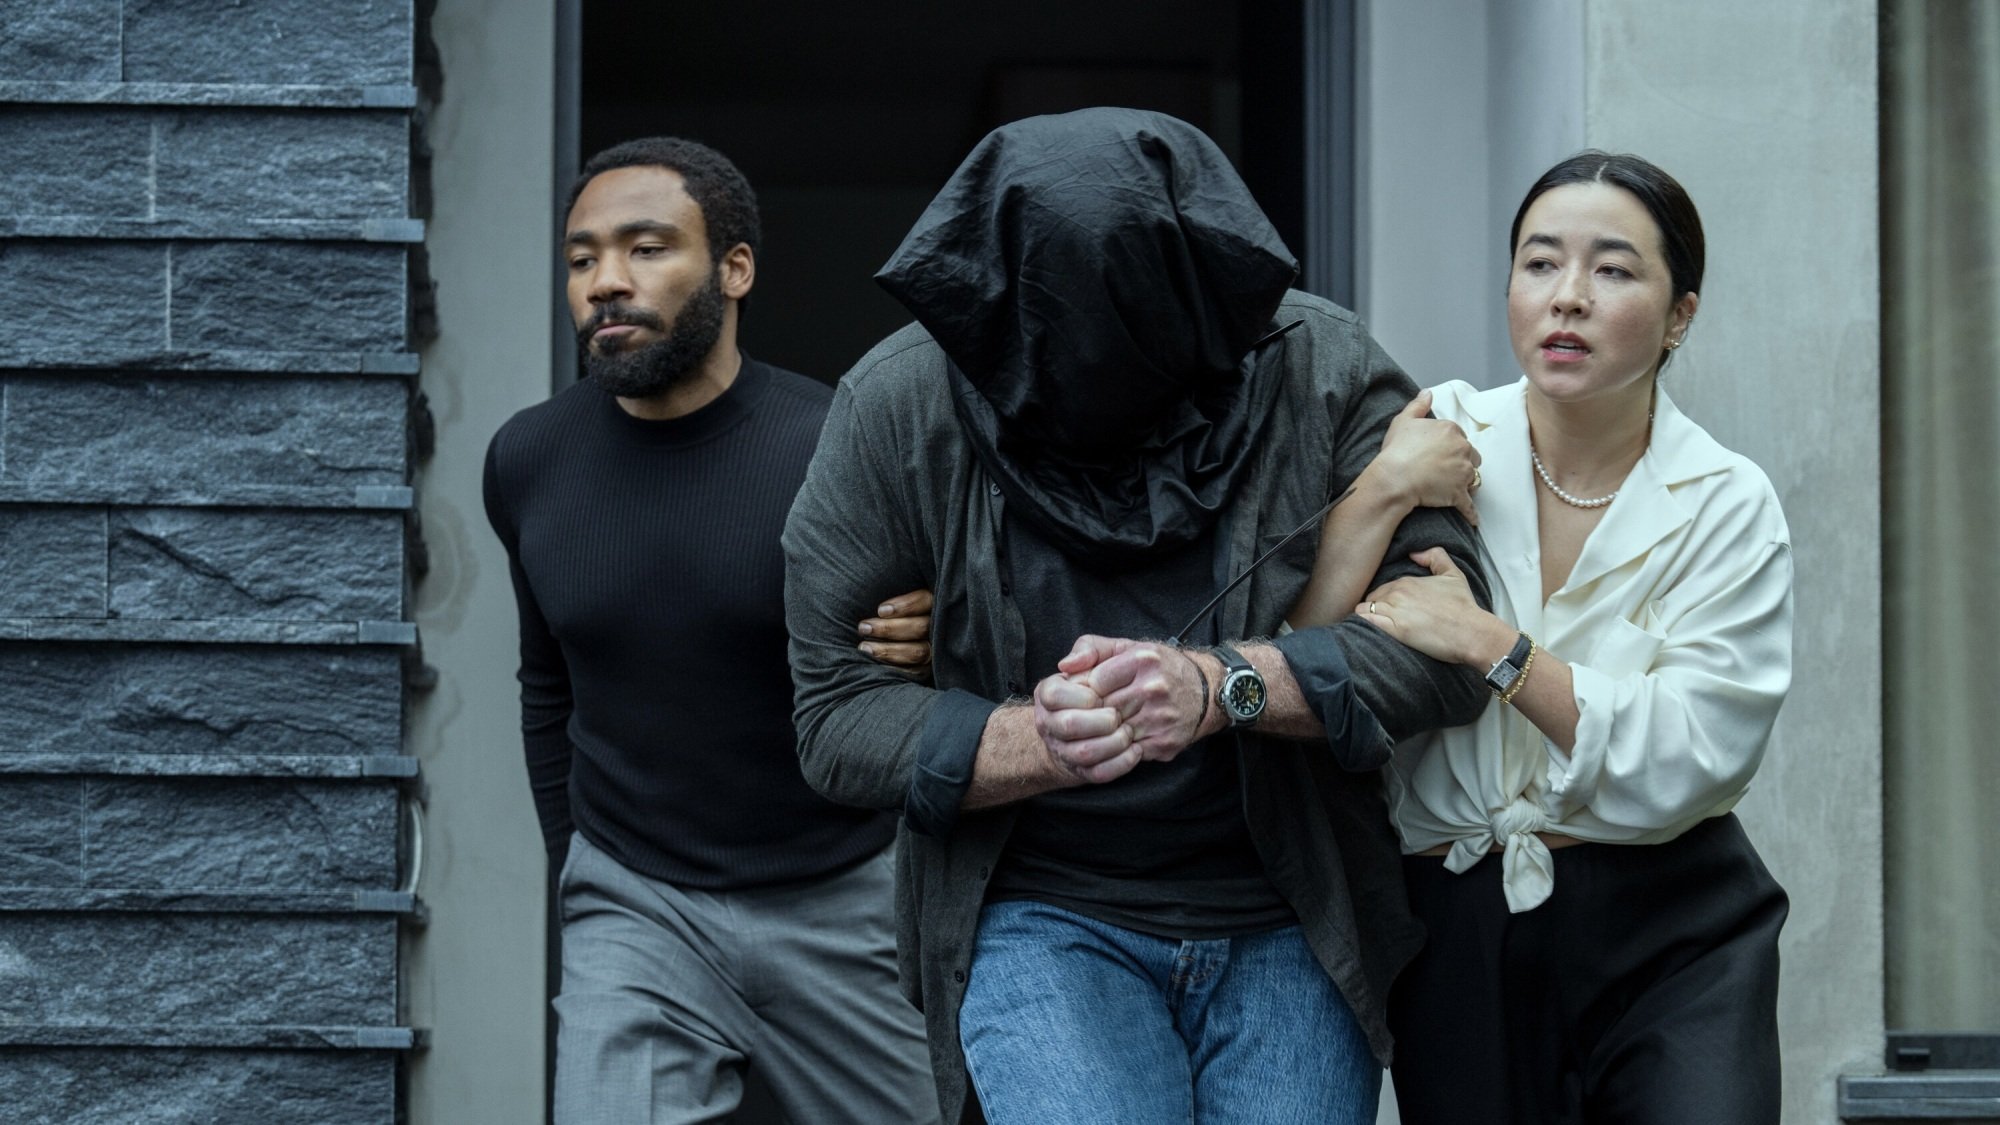 A man and woman escort a man with a black bag over his head out of a house.